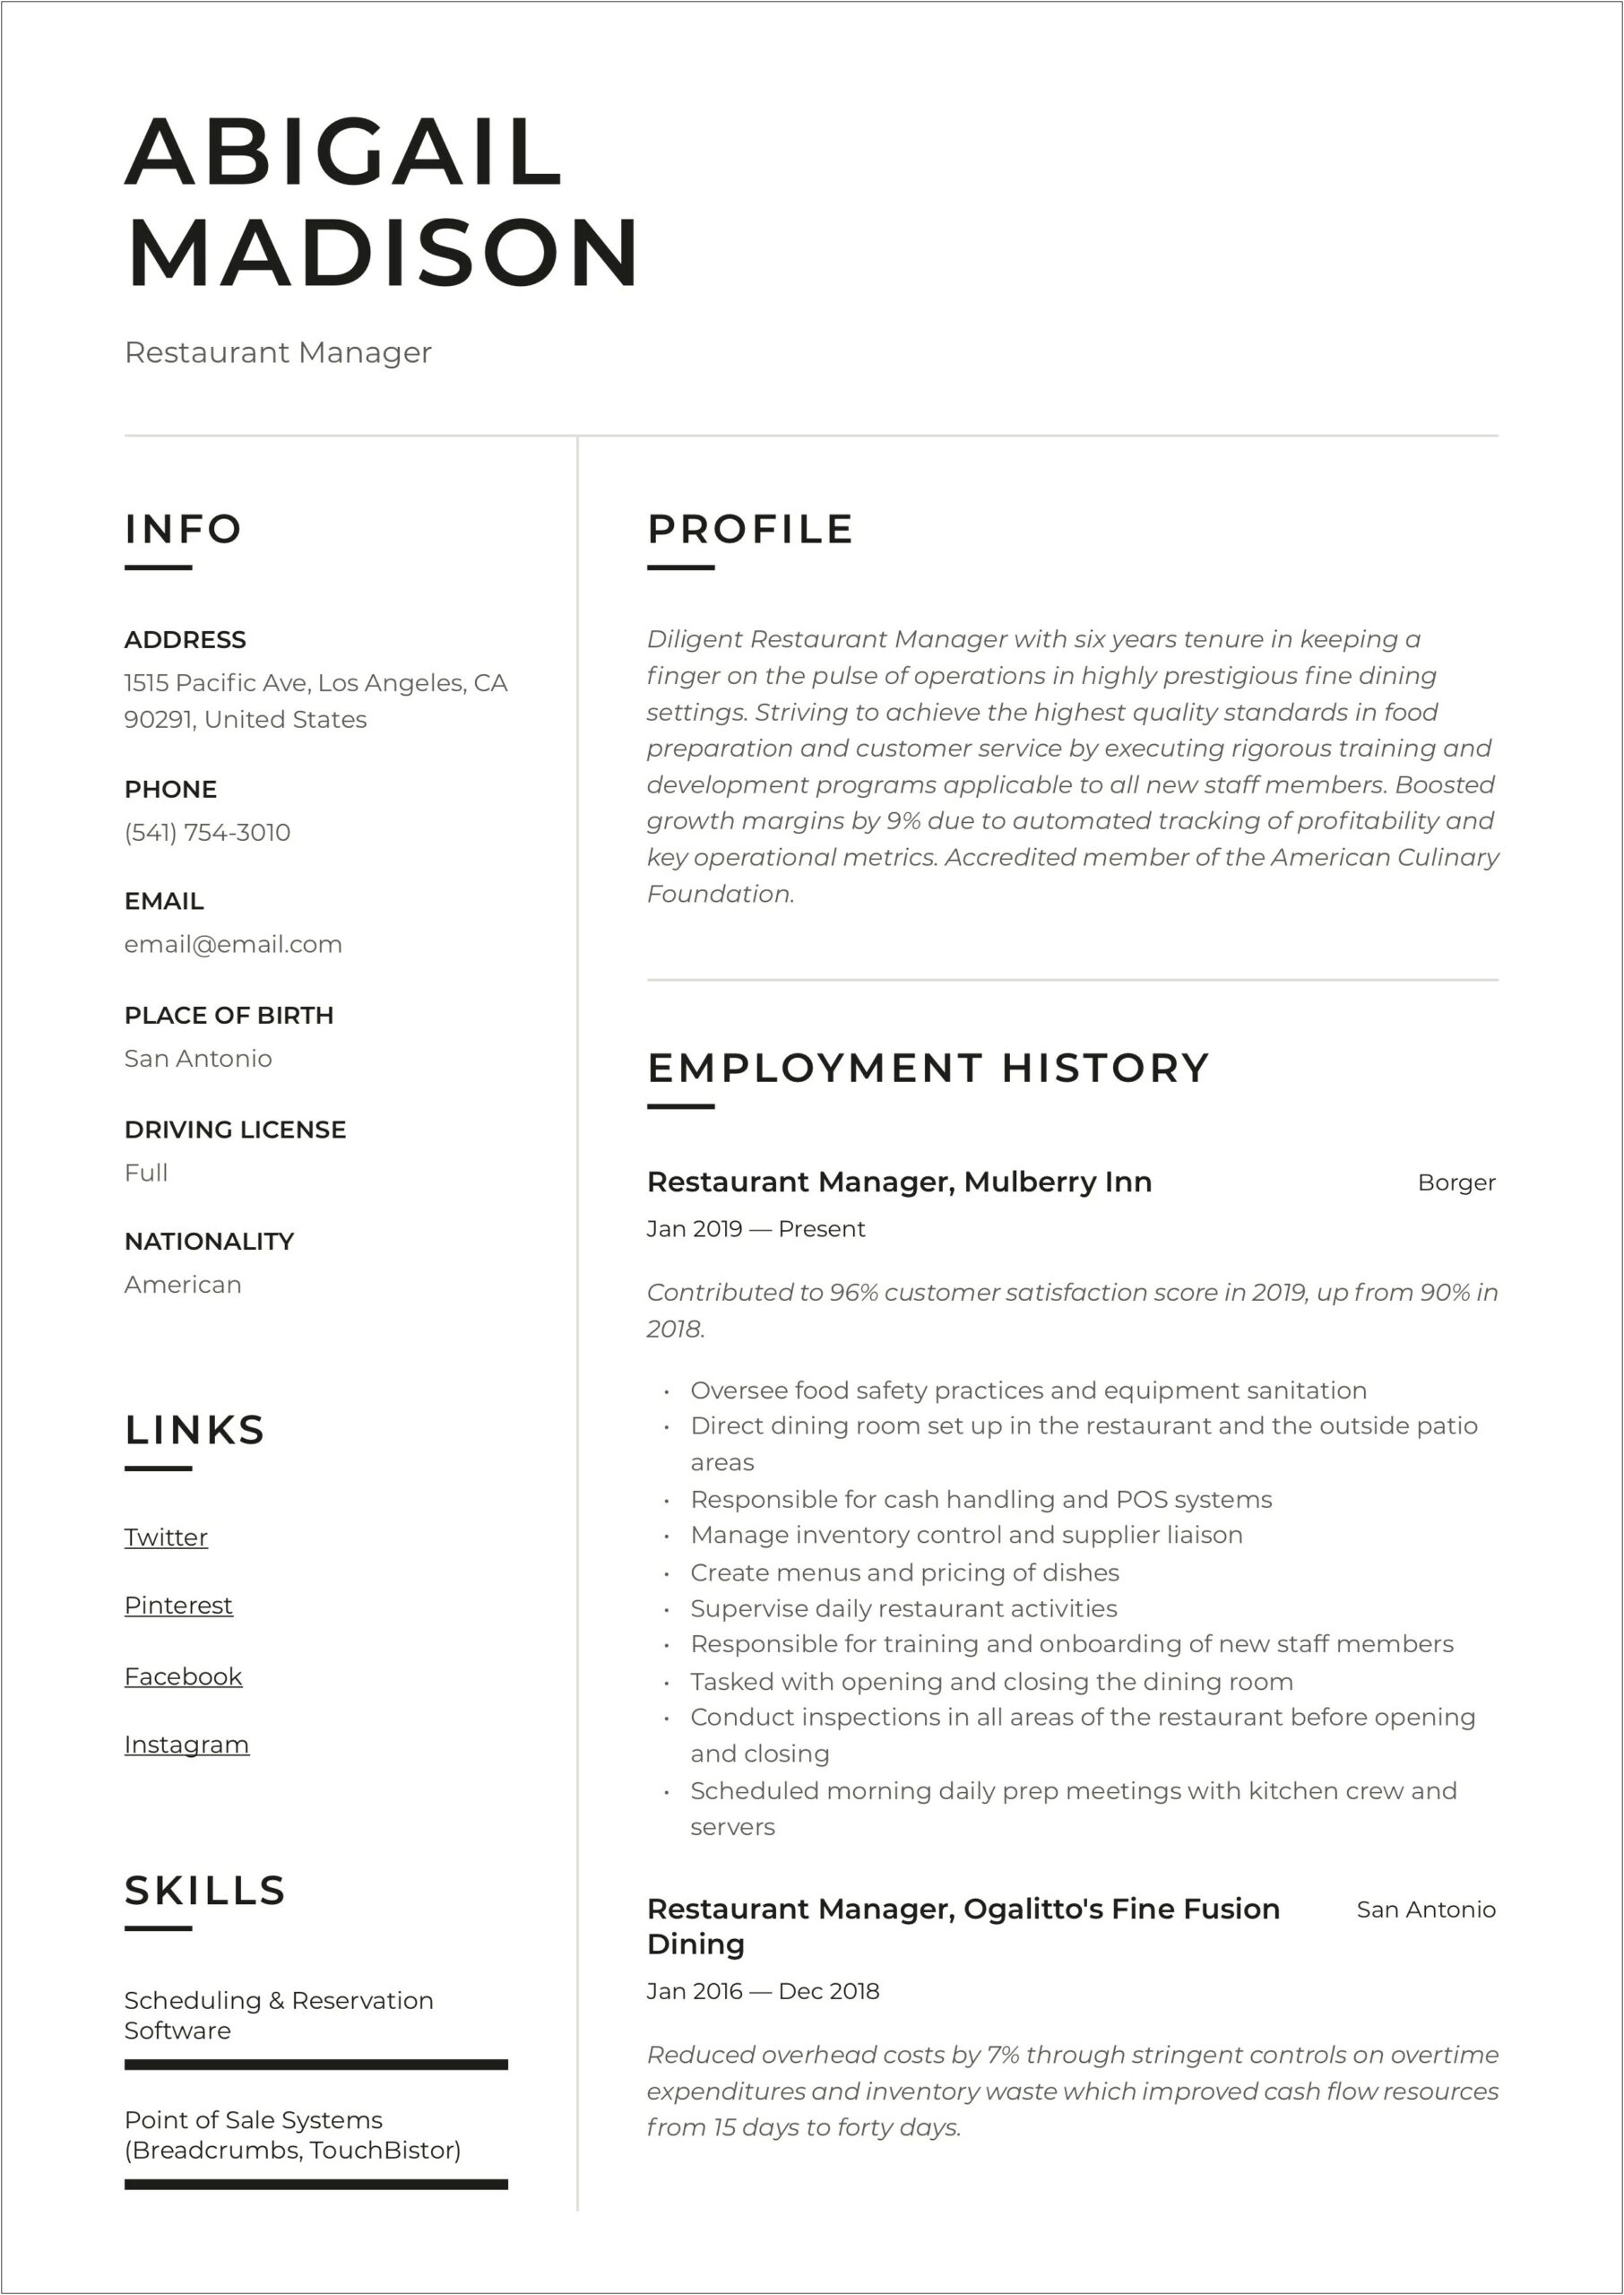 Example Of Food Service Manager Resume